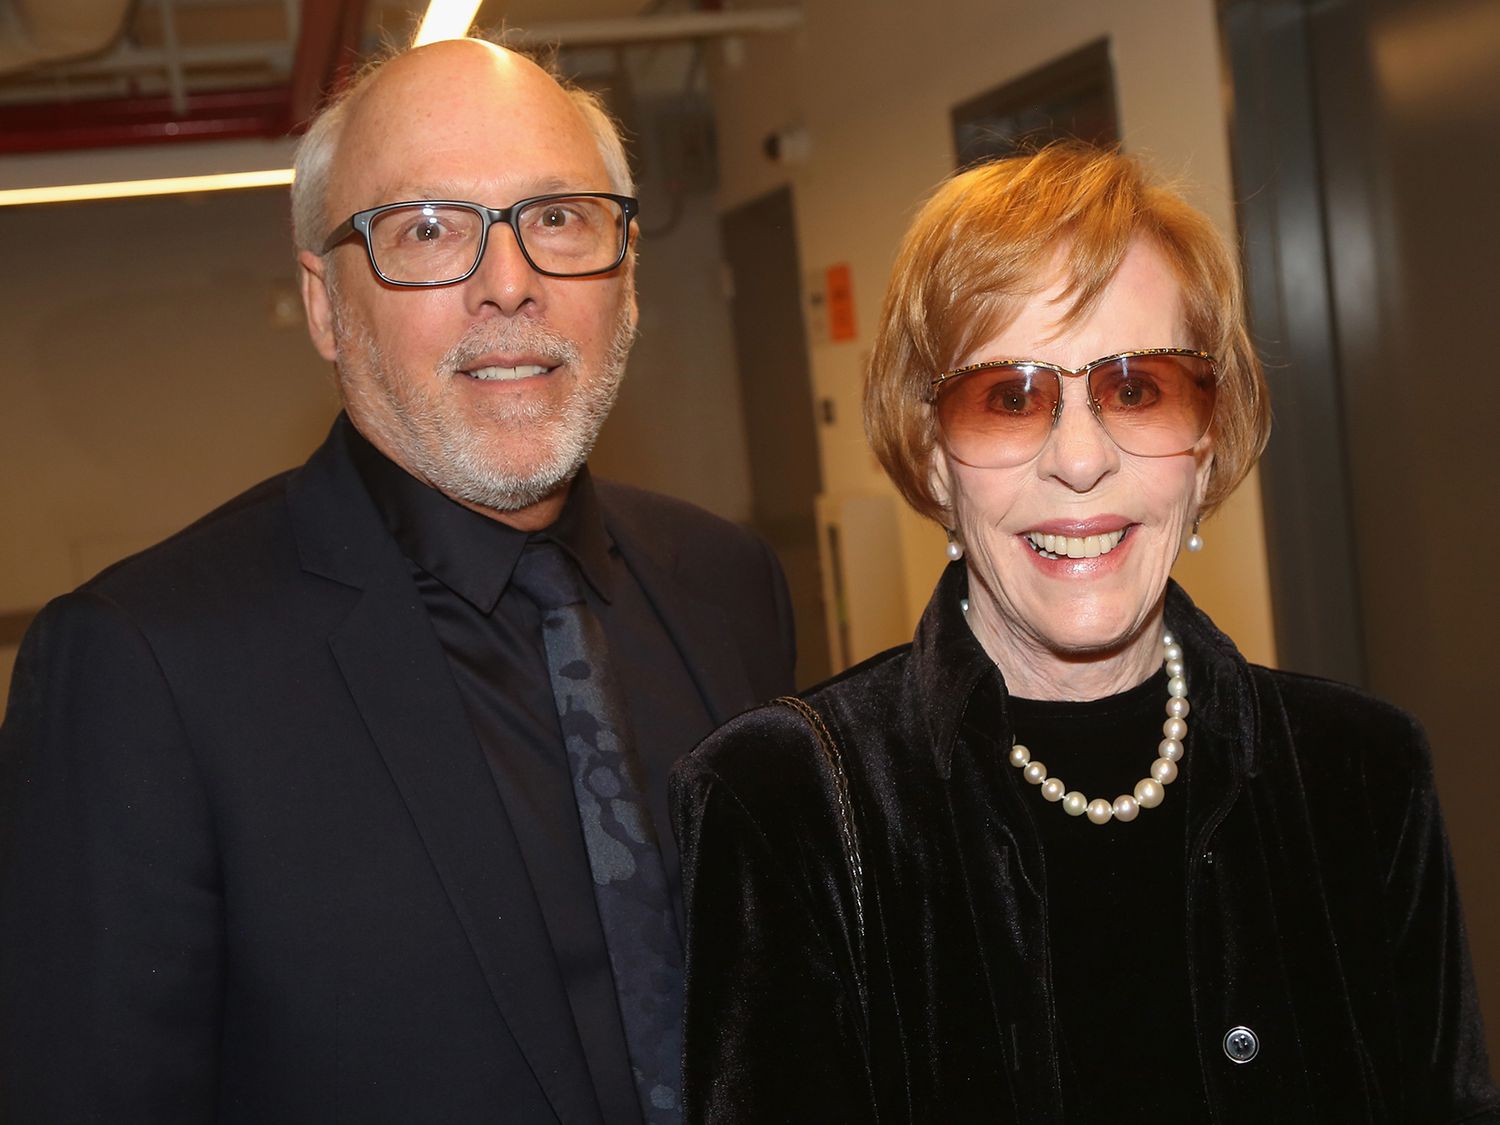 Brian Miller and wife Carol Burnett pose at the opening night of "Tootsie" on Broadway at The Marquis Theatre on April 23, 2019 in New York City